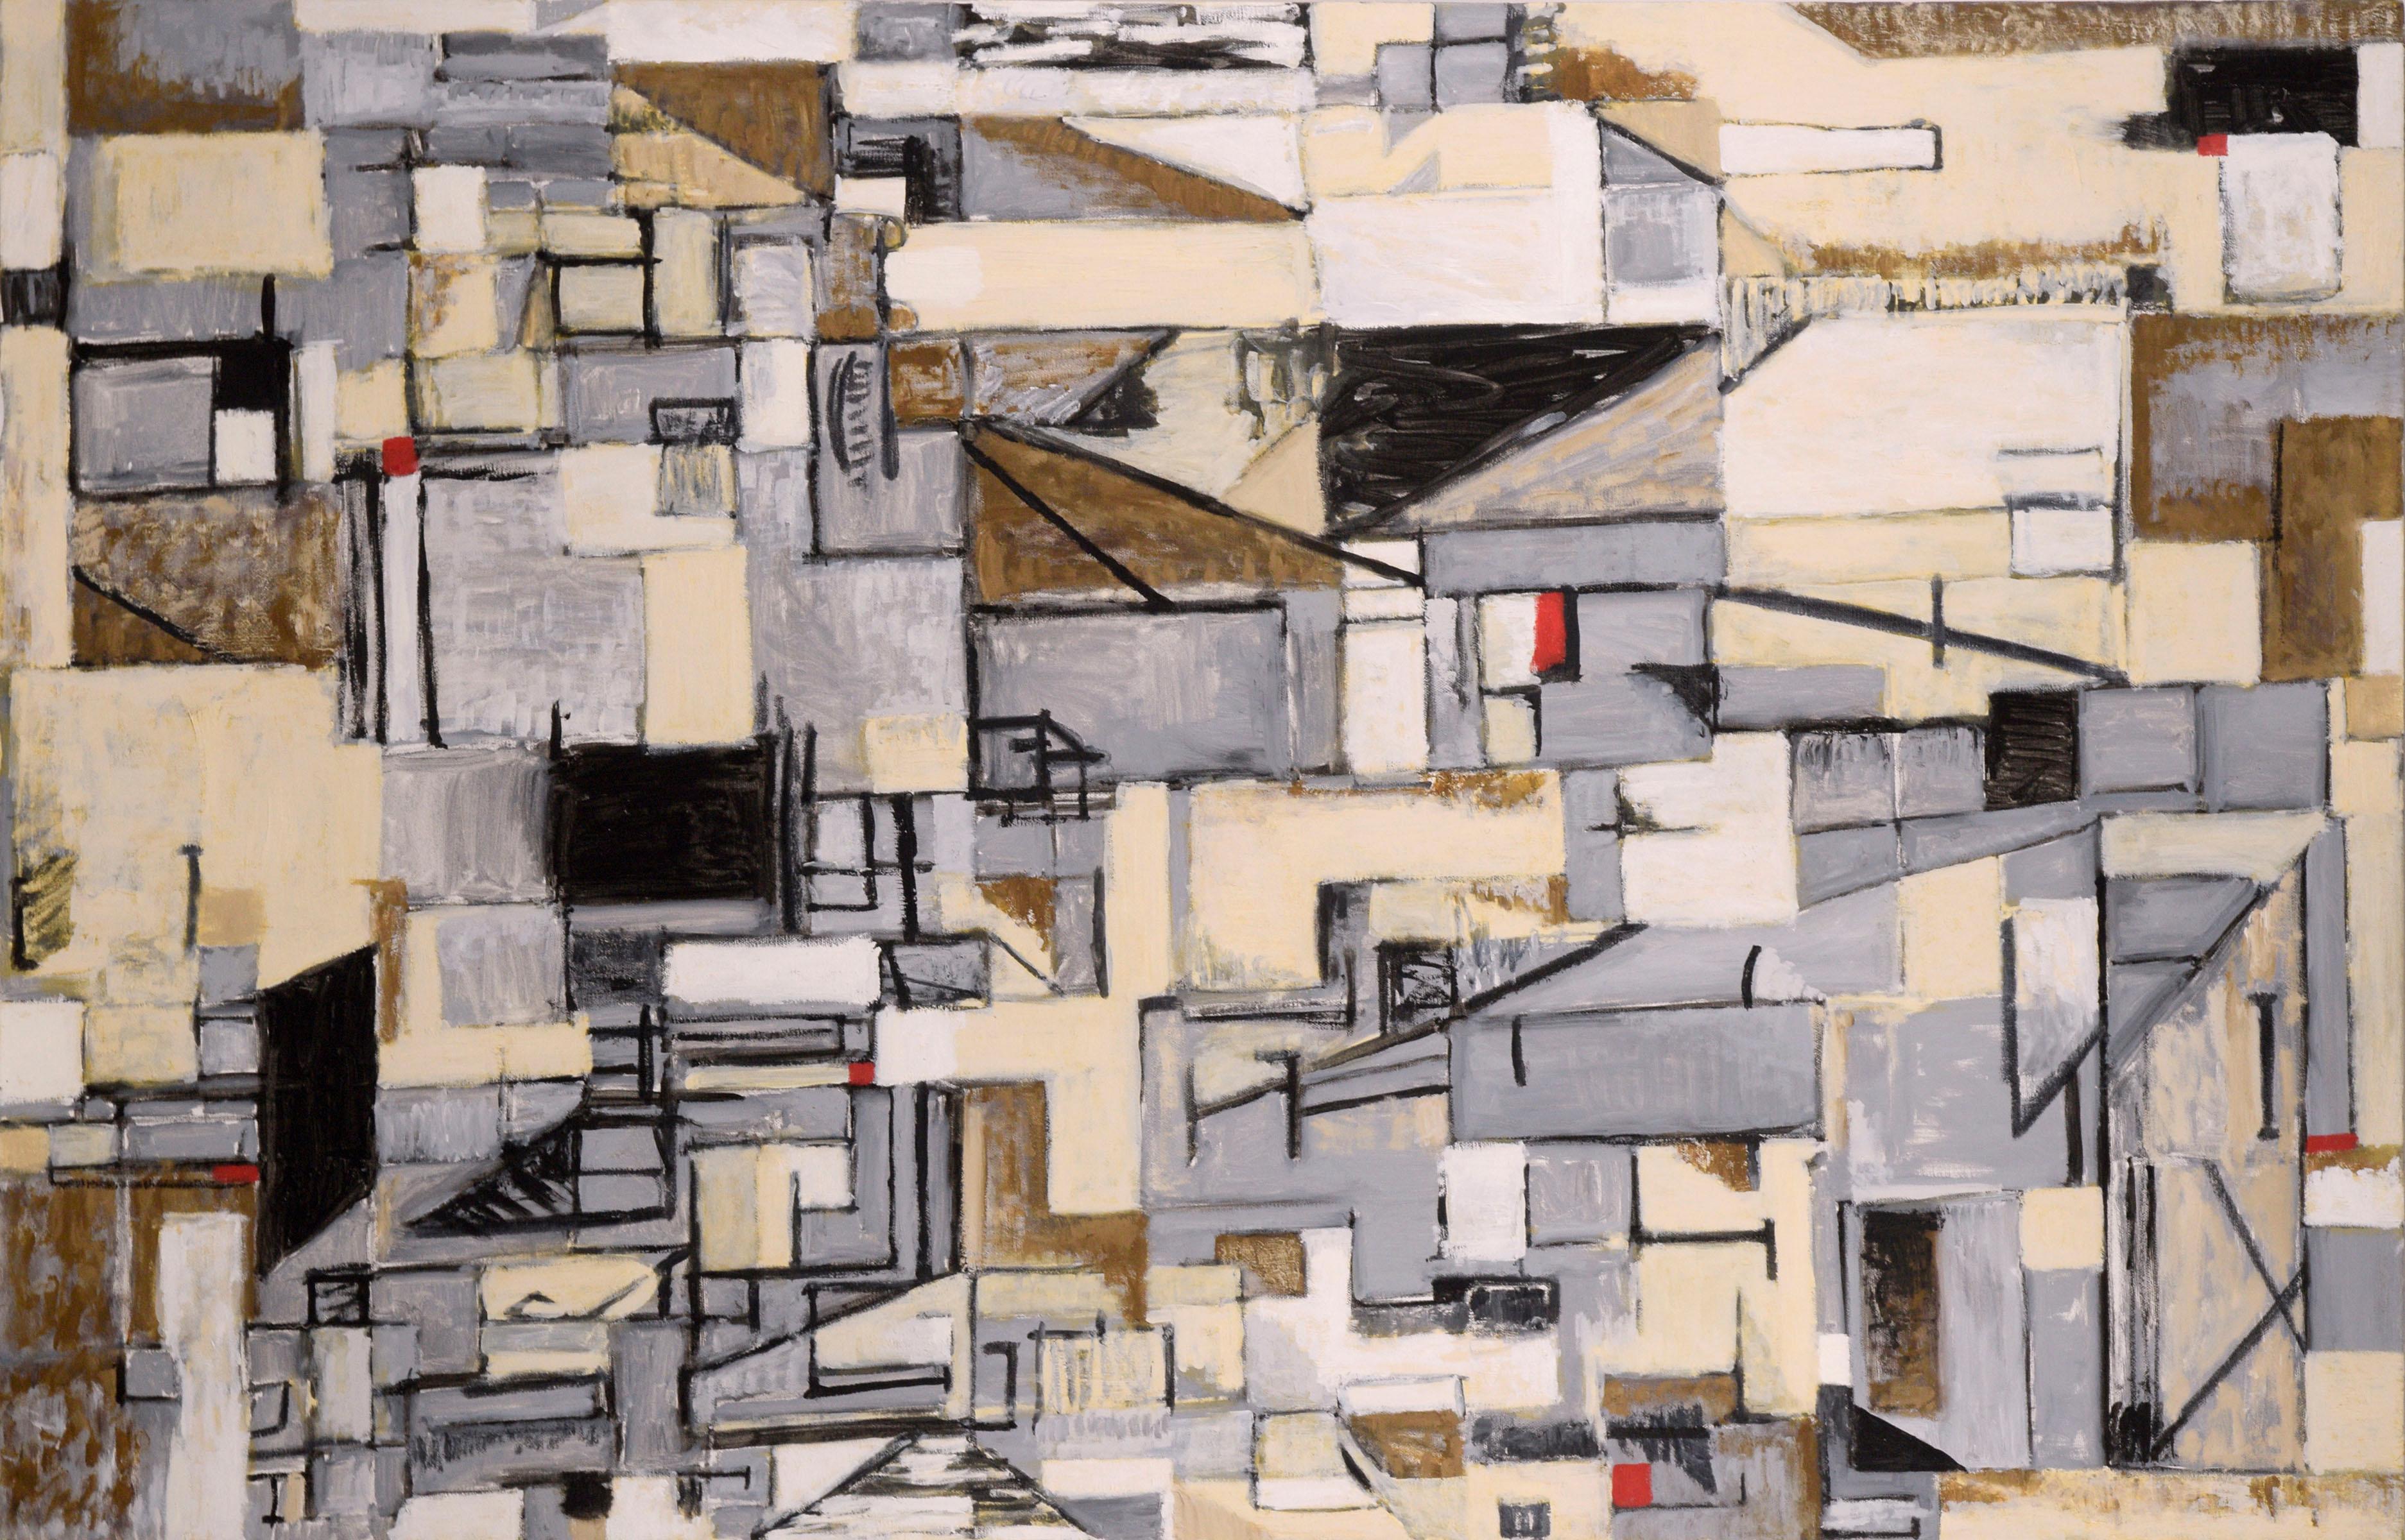 Modern Urban Industrial Cubist Abstract Cityscape in Neutrals with Red  - Painting by Michael Pauker 